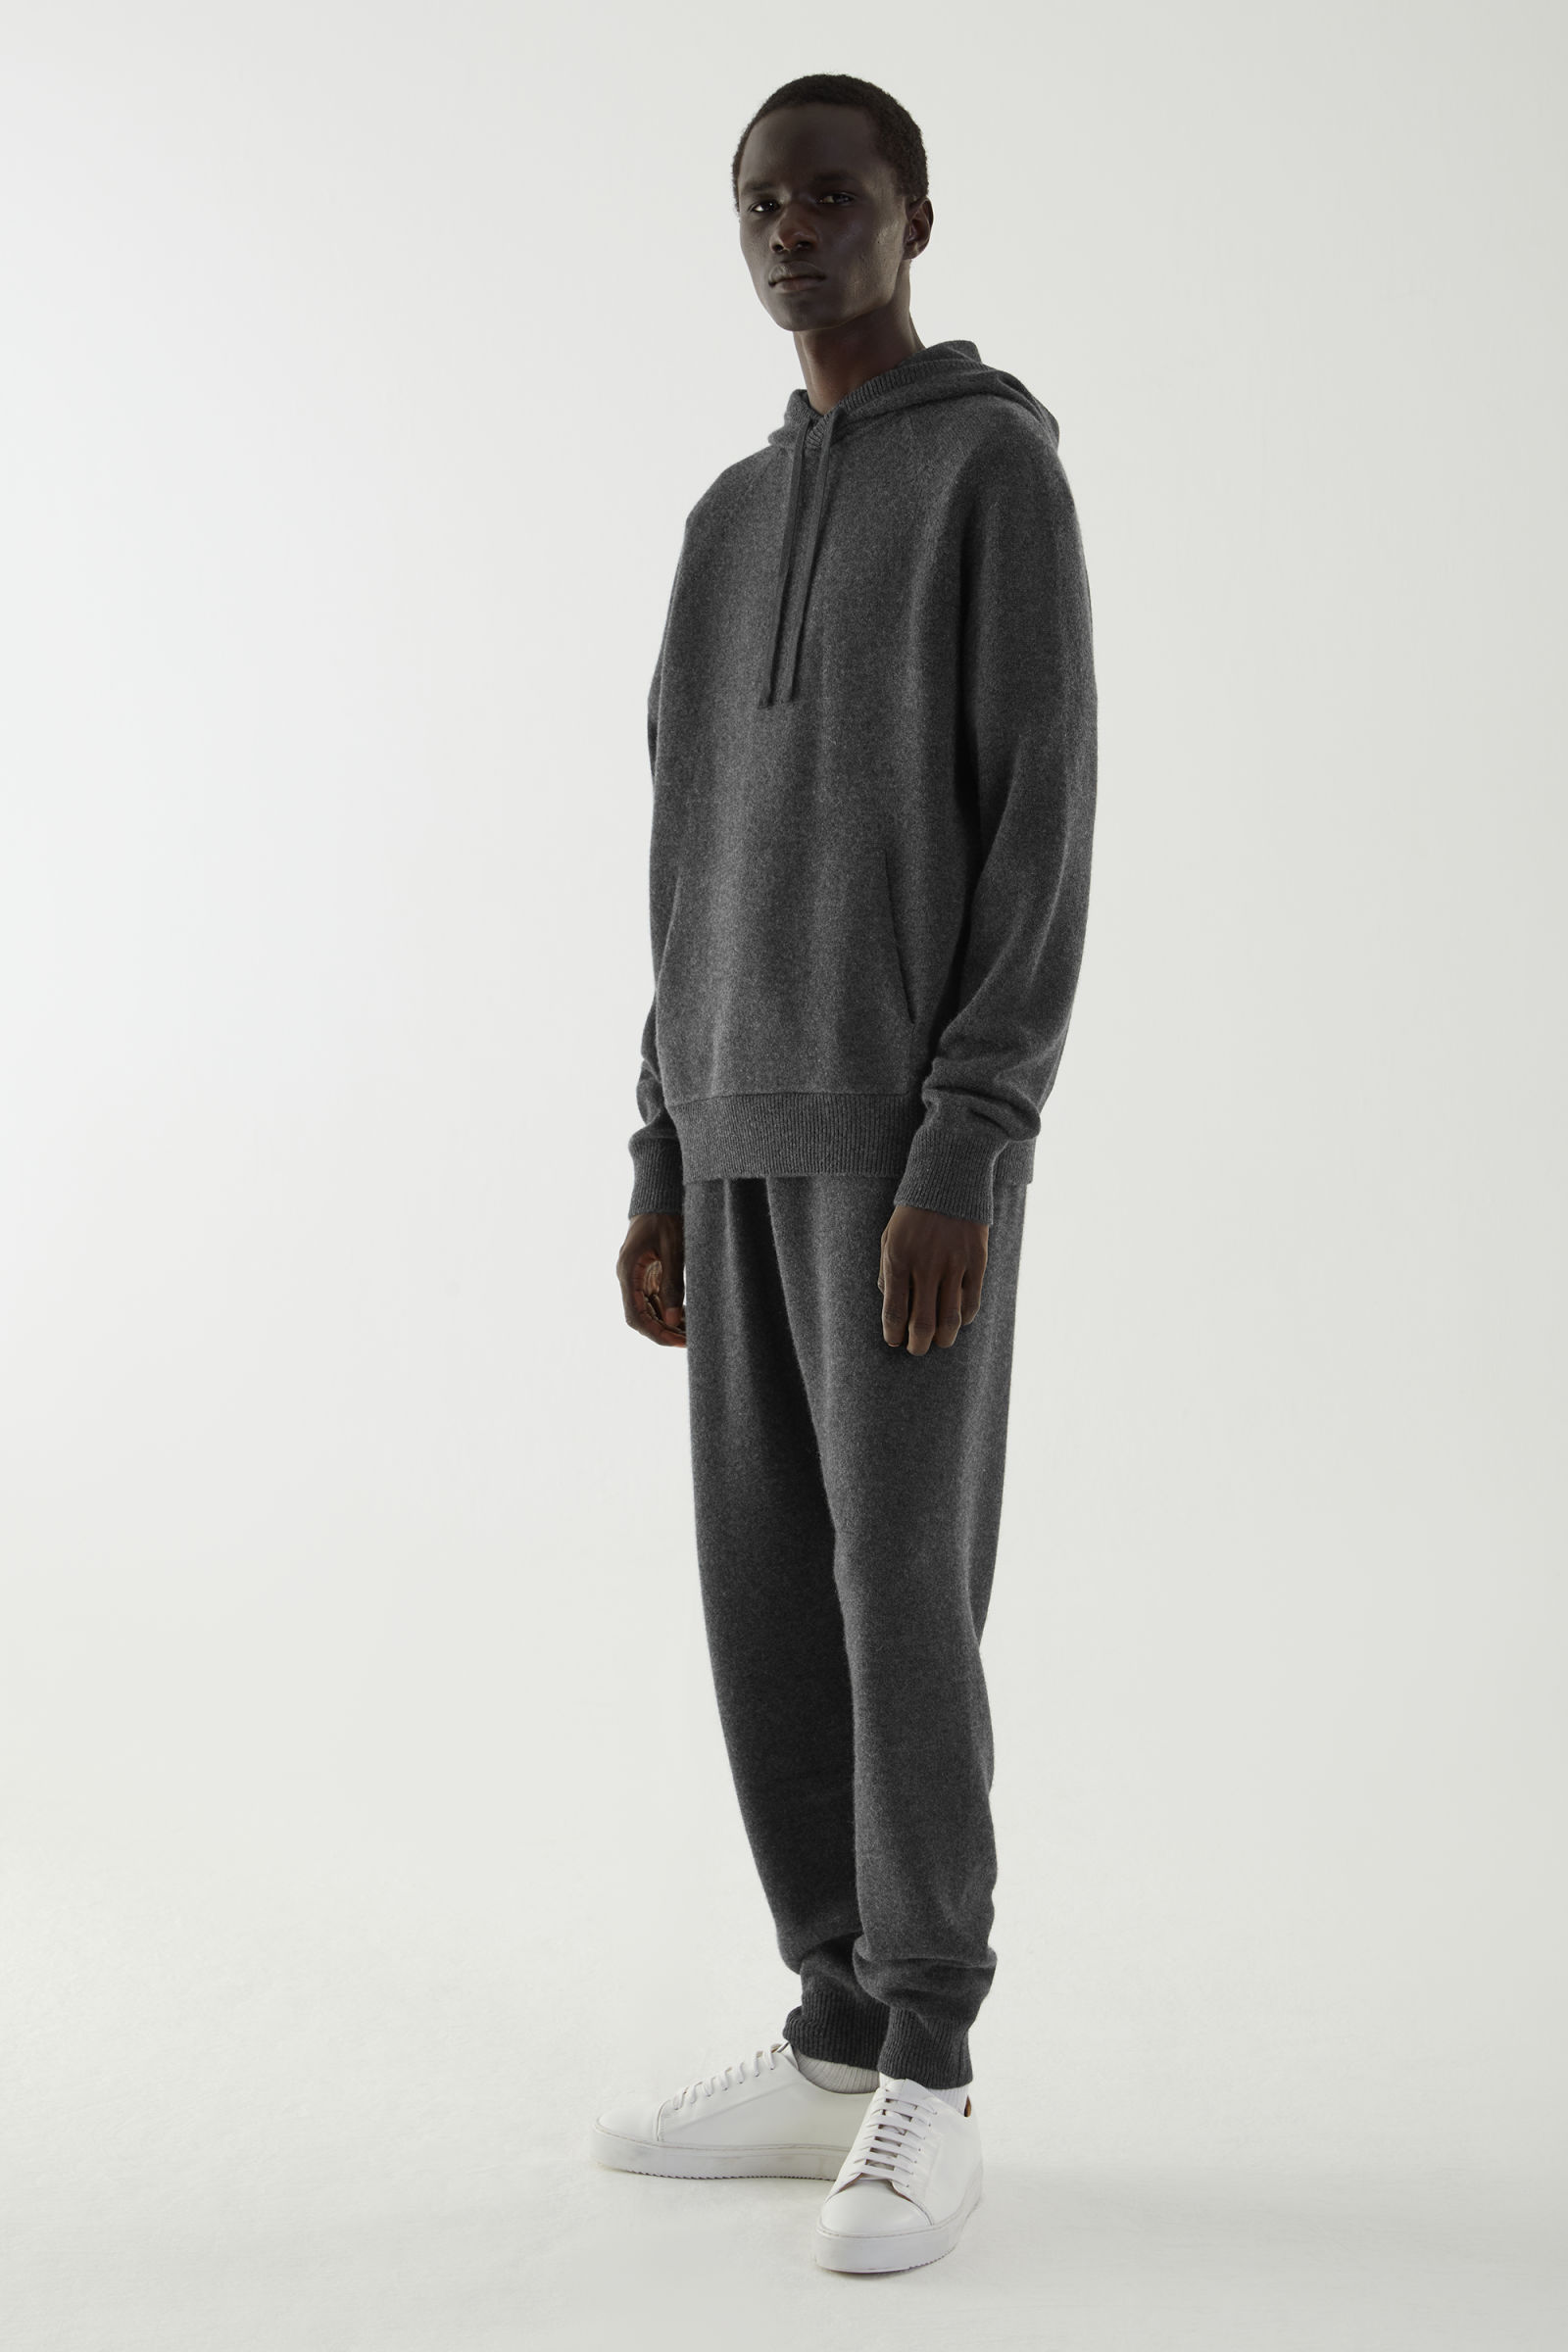 Get Cozy in Our Top Sweatsuit Picks This Winter - V Magazine